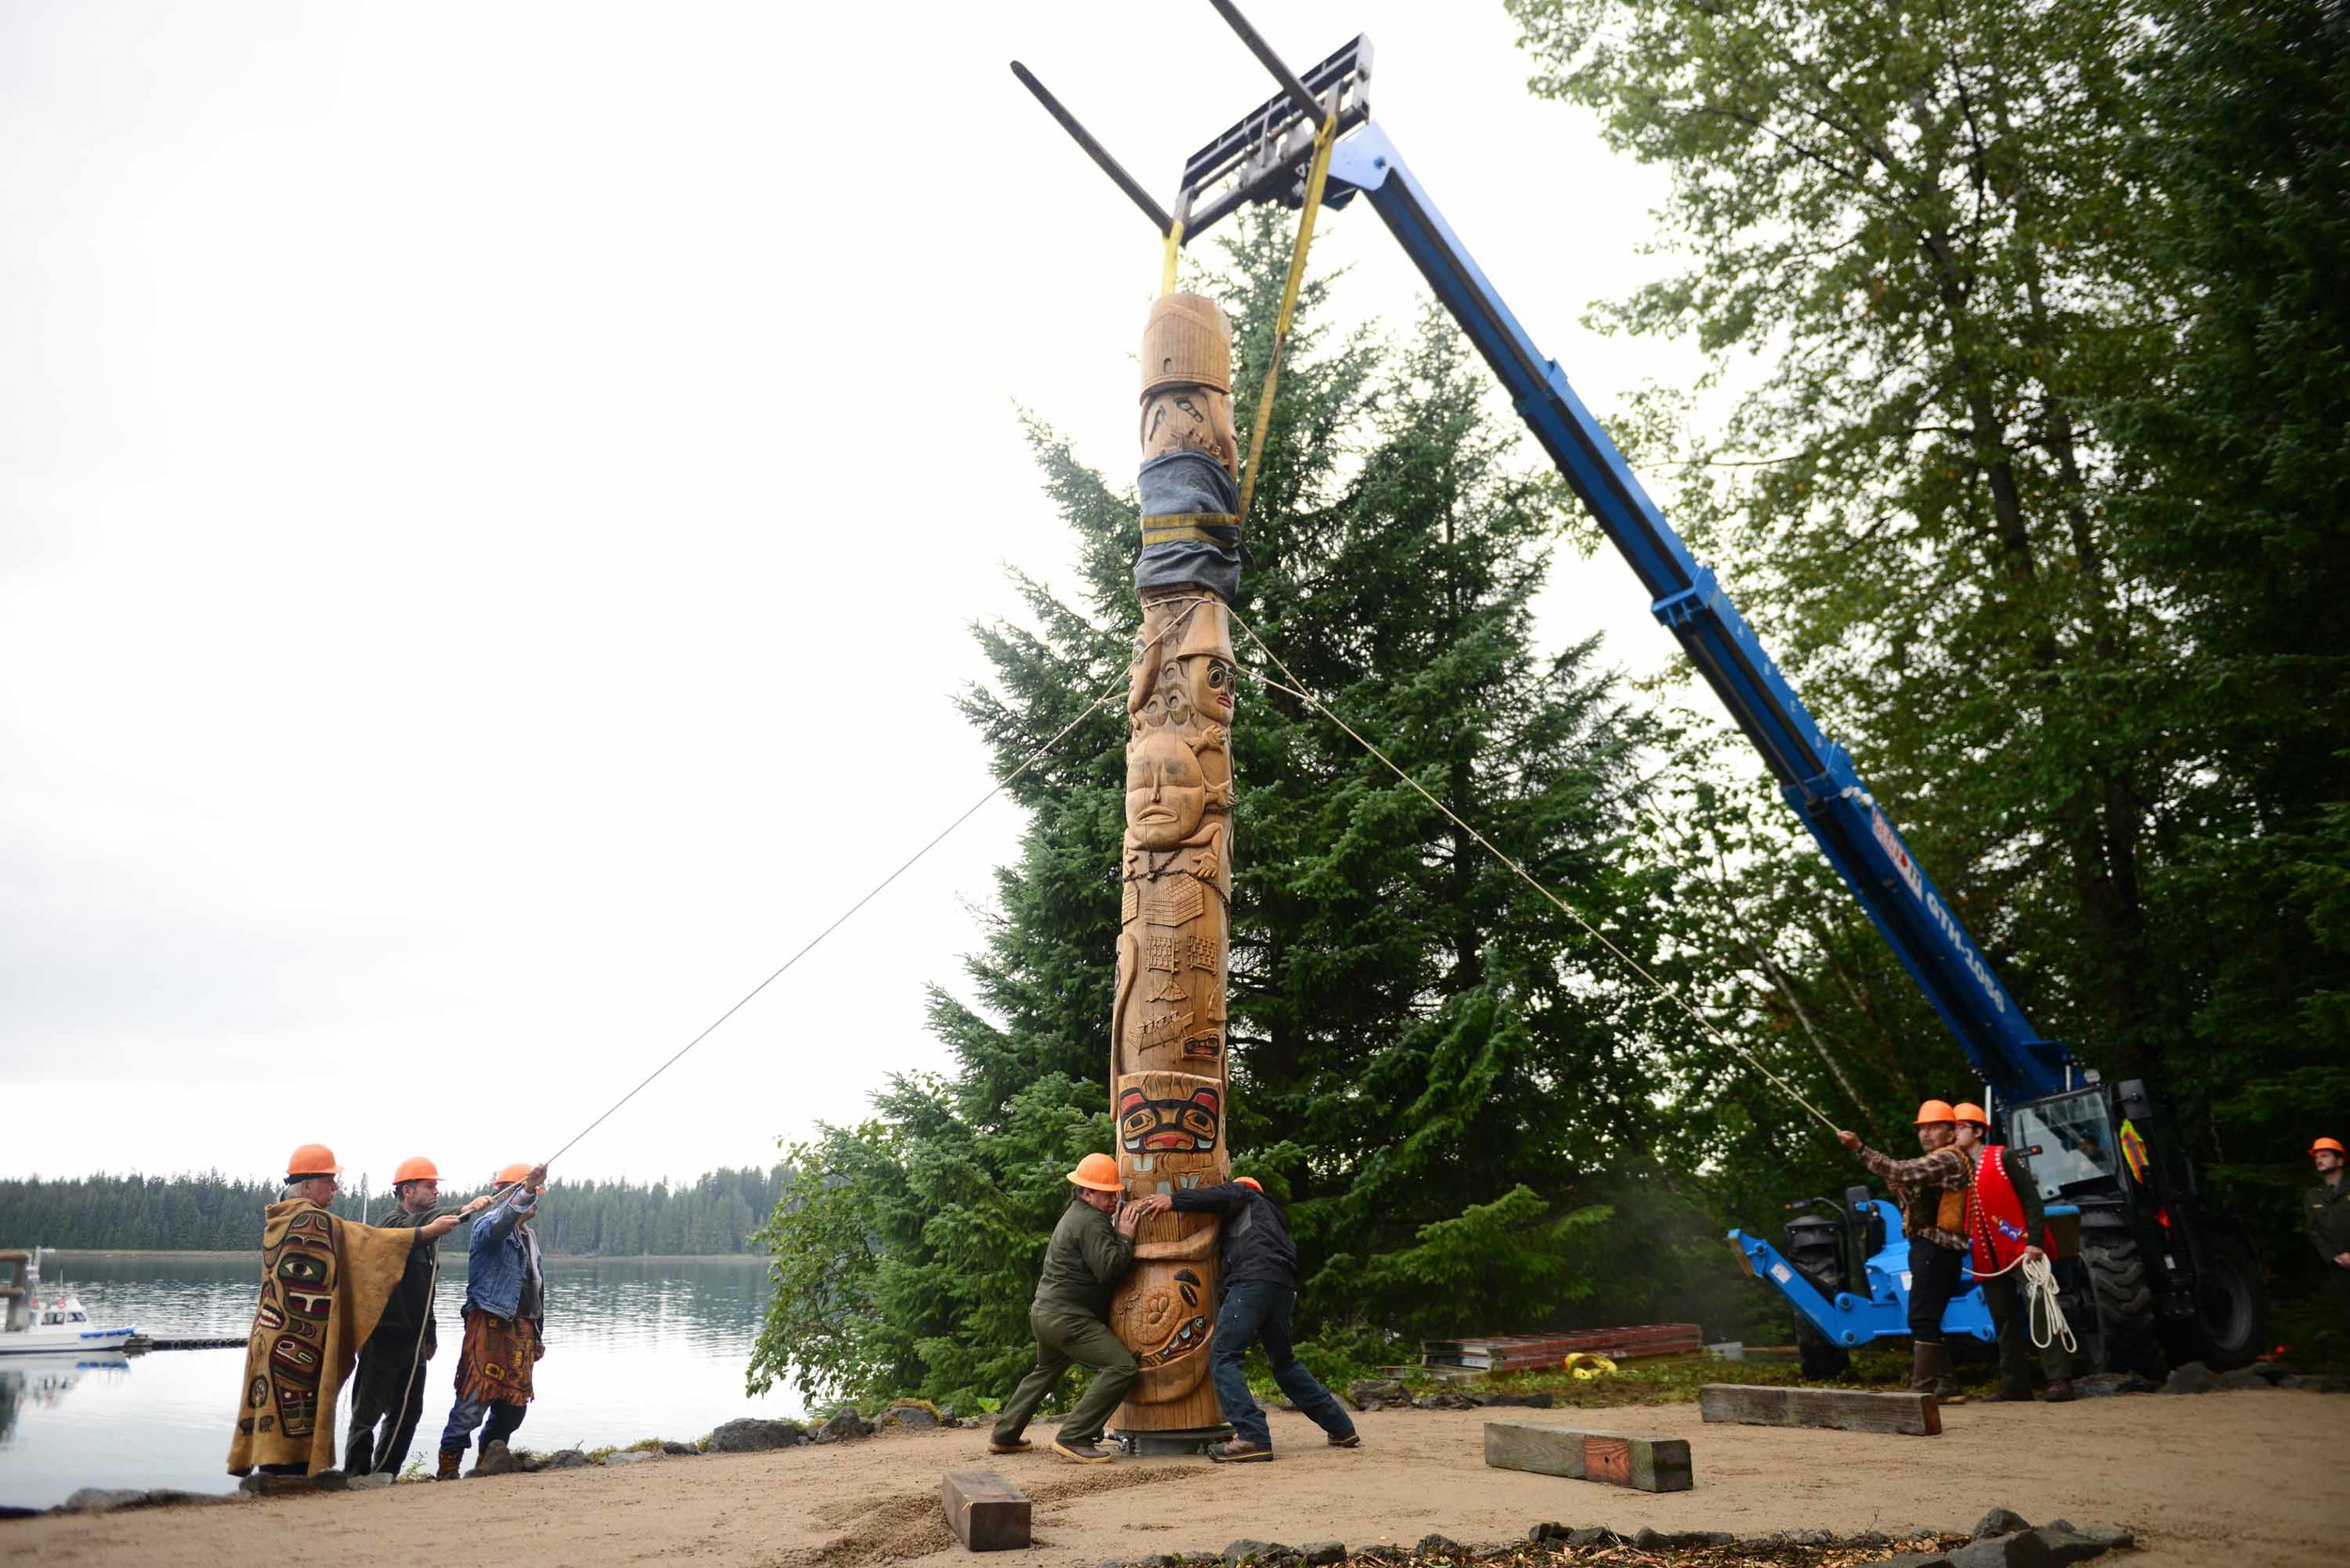  A healing pole is erected in Bartlett Cove in Glacier Bay National Park, representing a new chapter in the relationship between the National Park Service and the Tlingit people, who worked collaboratively to build a new clan house in the Cove, prior